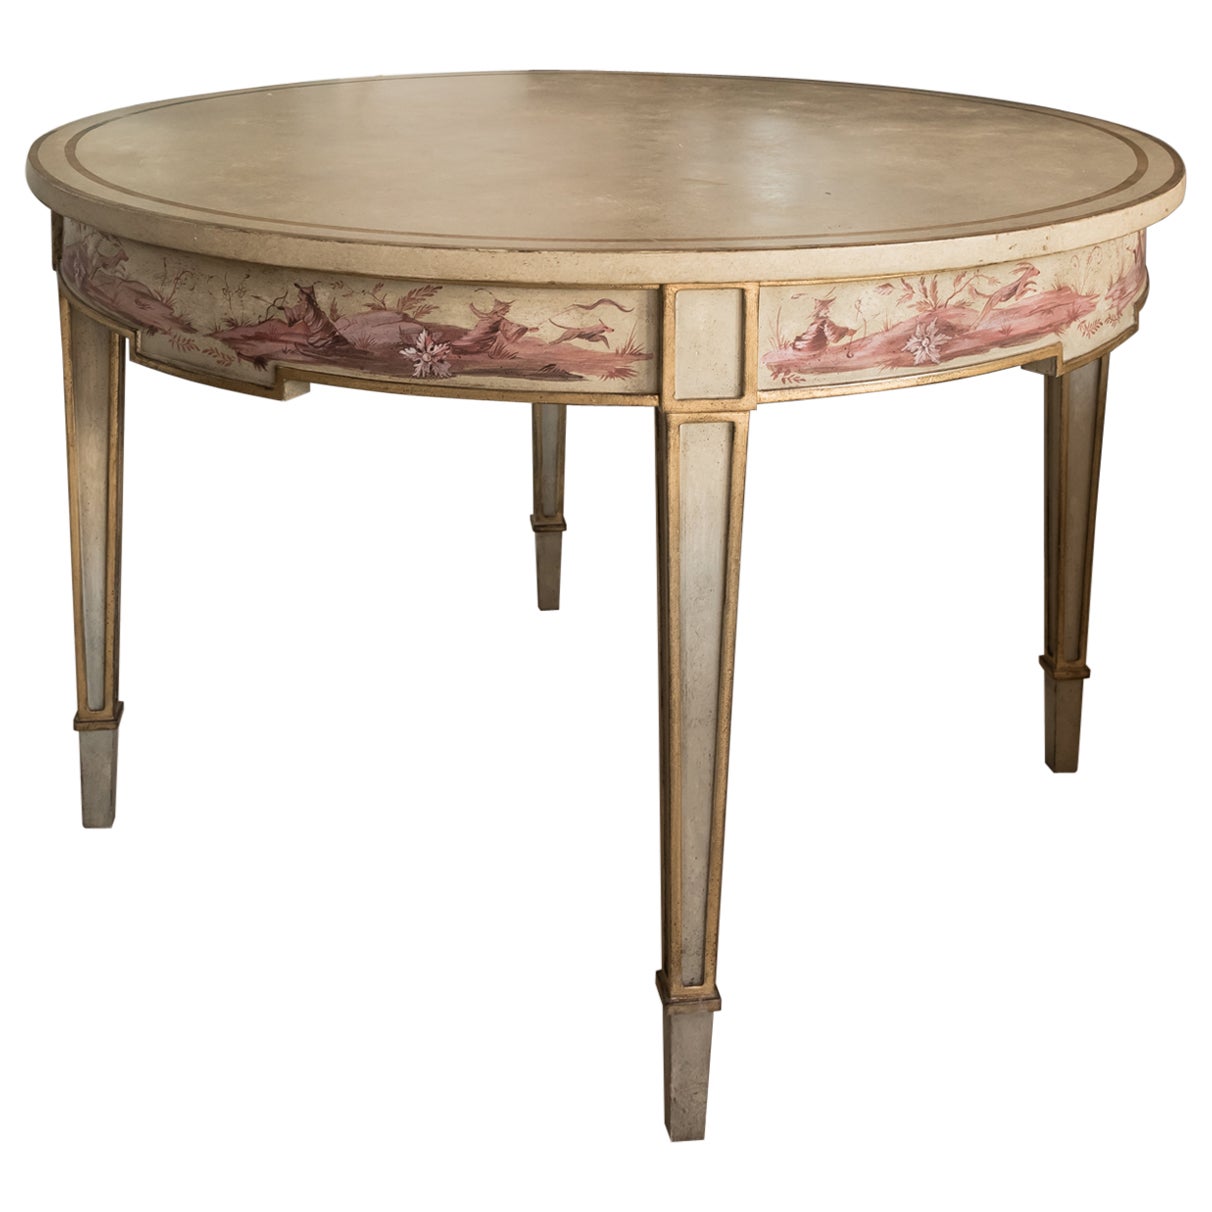 18th Century Hand-Painted Venetian Apple Green Manin Table with Chinoiserie For Sale